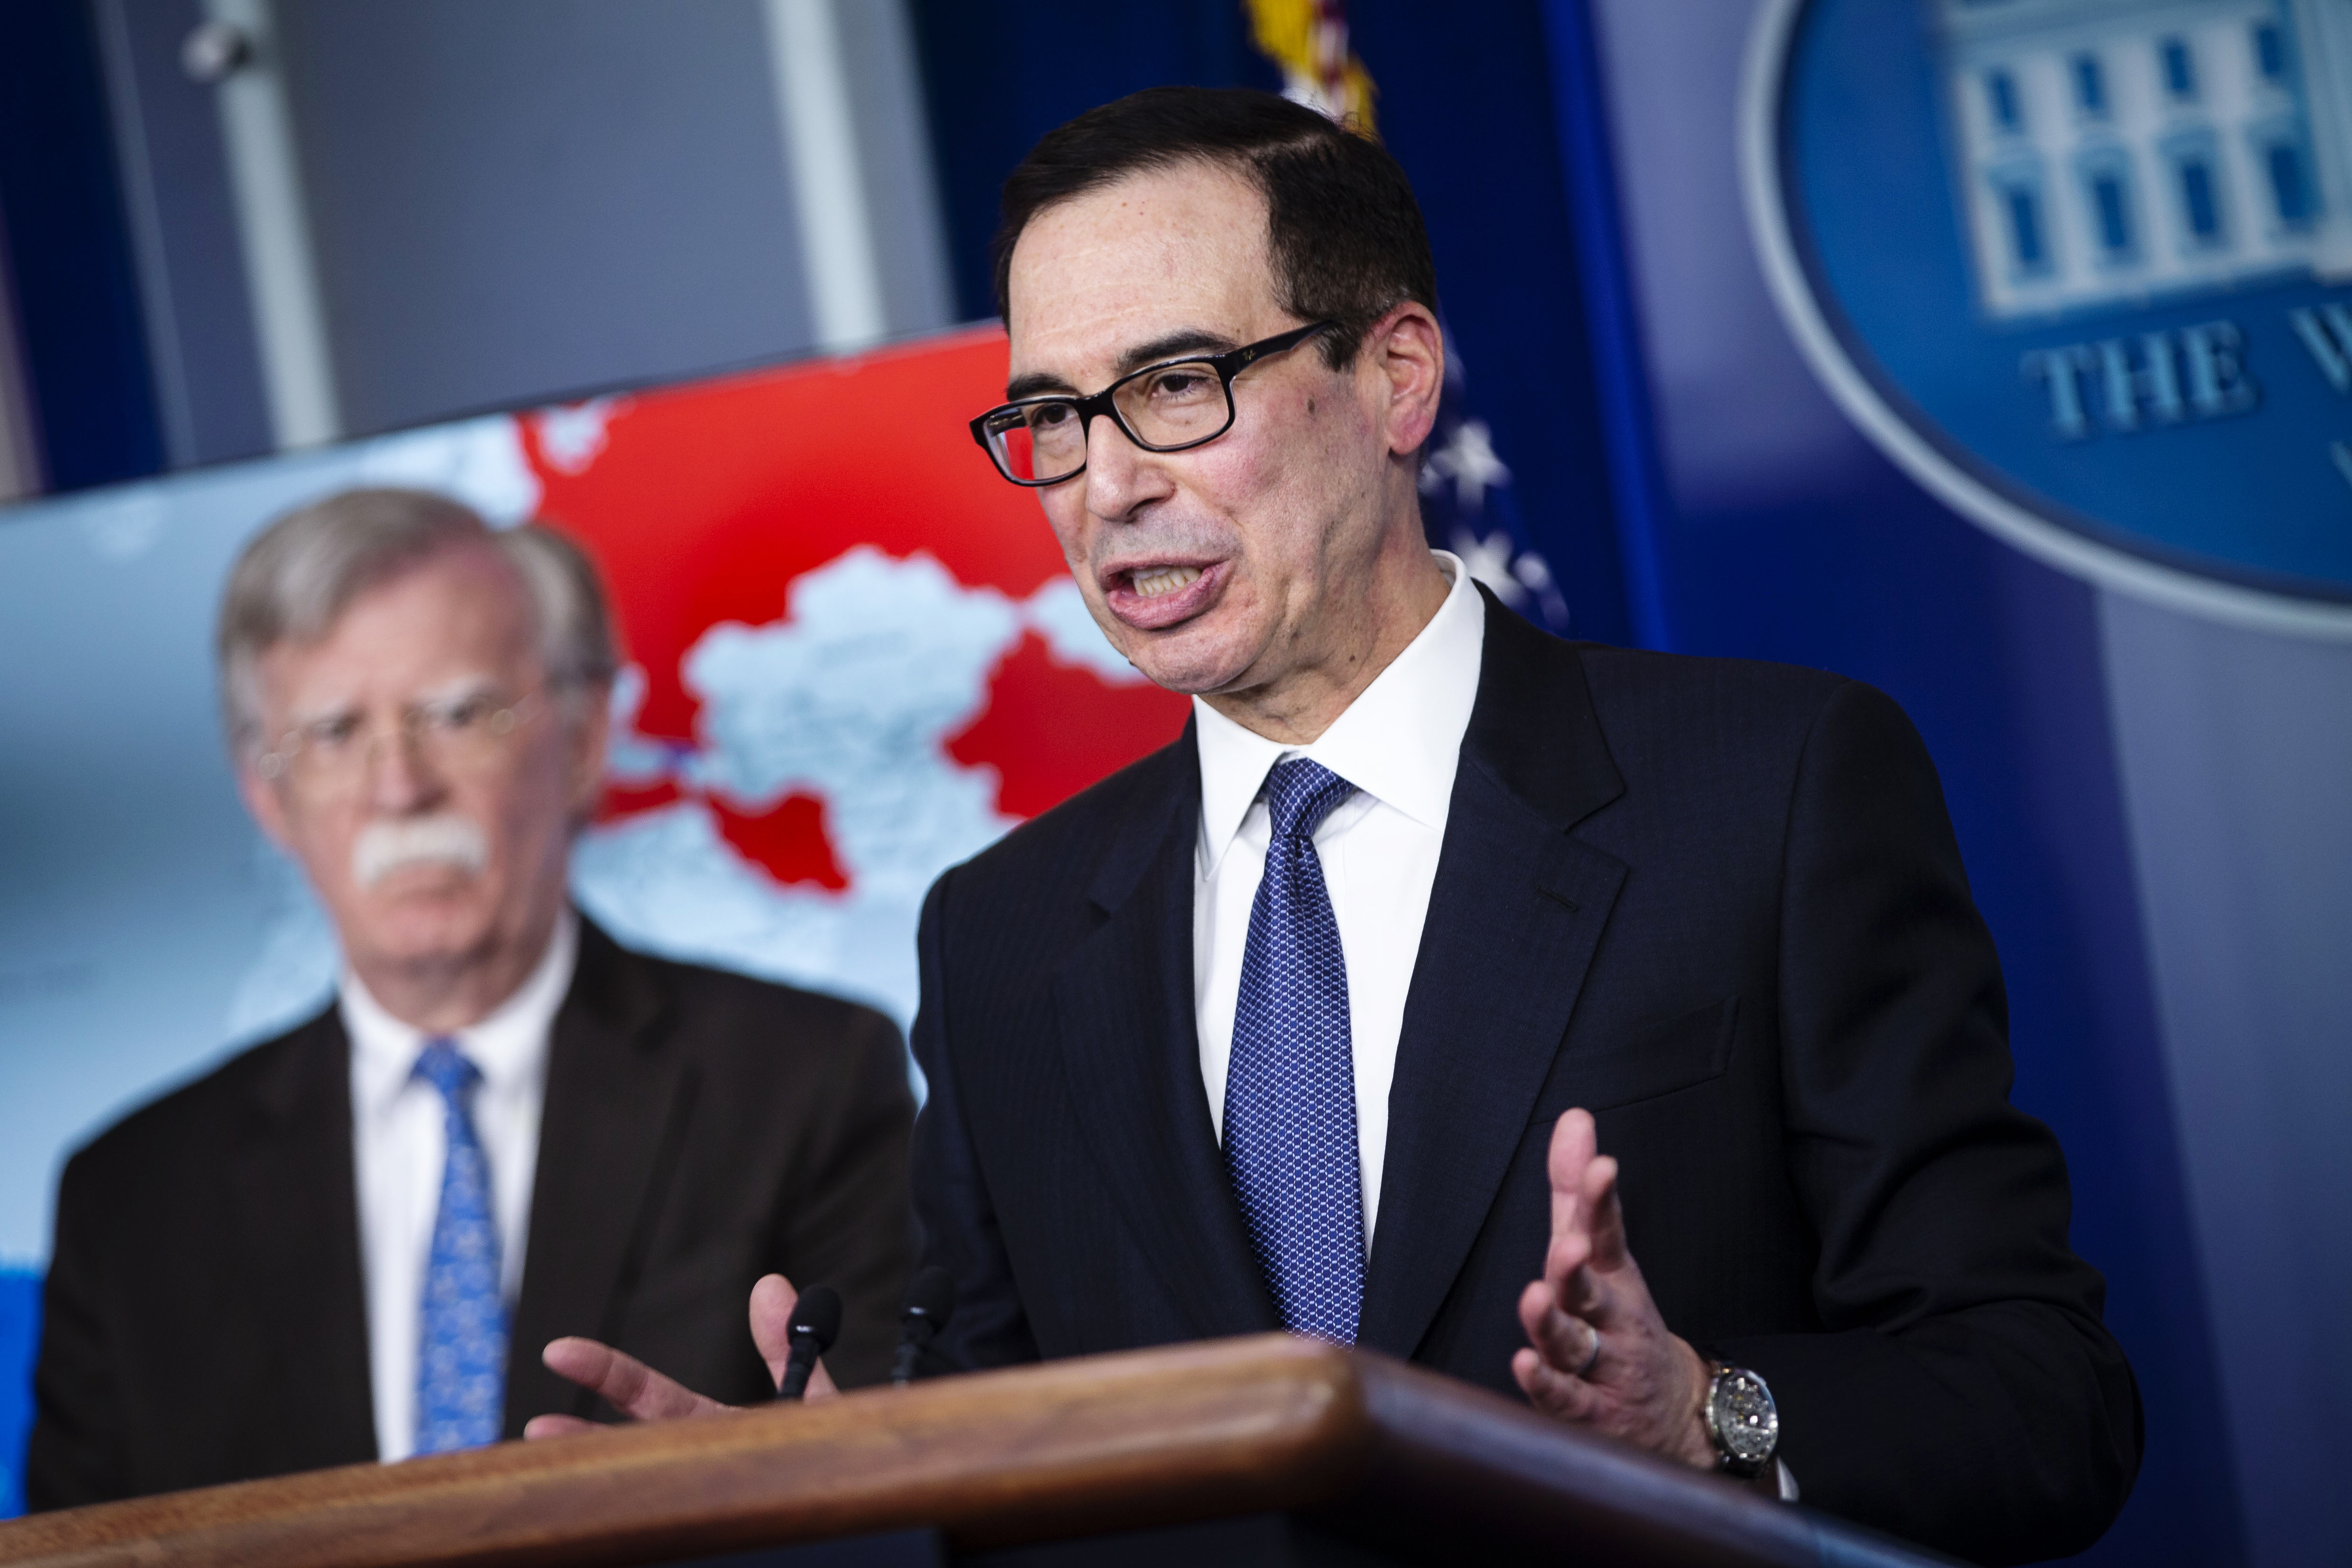 Steven Mnuchin, U.S. Treasury secretary, speaks during a White House briefing in Washington, D.C., U.S., on Monday, Jan. 28, 2019. According to Mnuchin, the Trump administration will press China to show it can live up to its promises in talks this week aimed at ending the trade war between the worlds two biggest economies. Photographer: Al Drago/Bloomberg